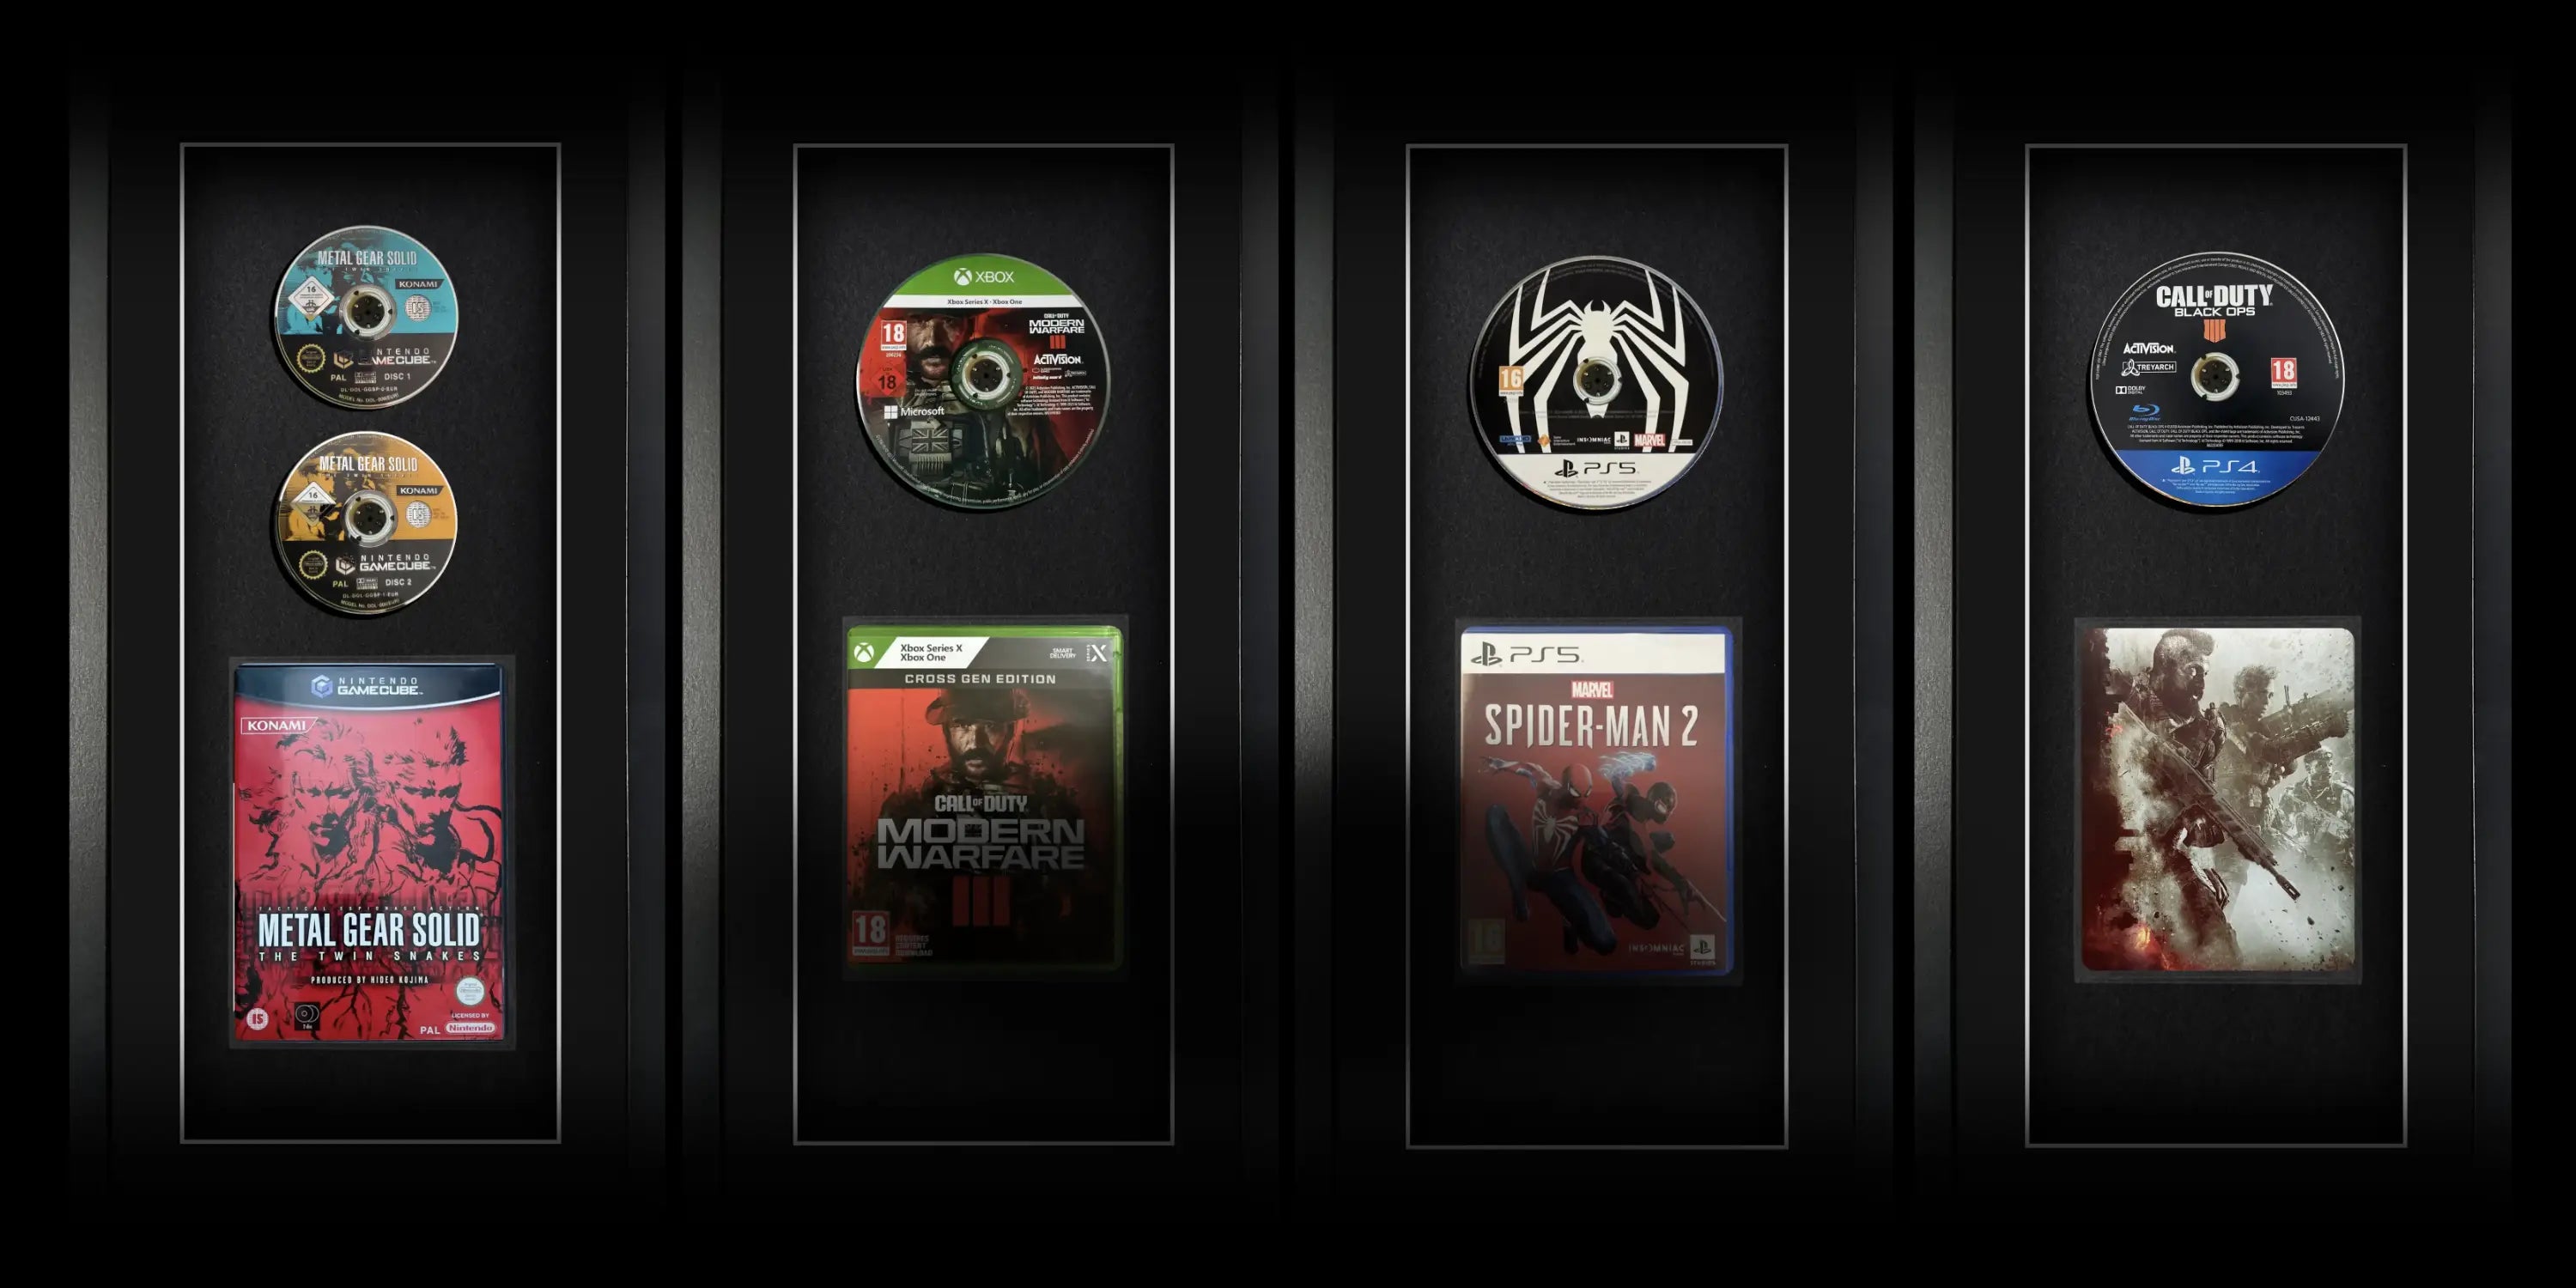 Shows COD Modern Warfare and Spider Man inside of a frame. Frame a game with Cheevo. Playstation & Xbox